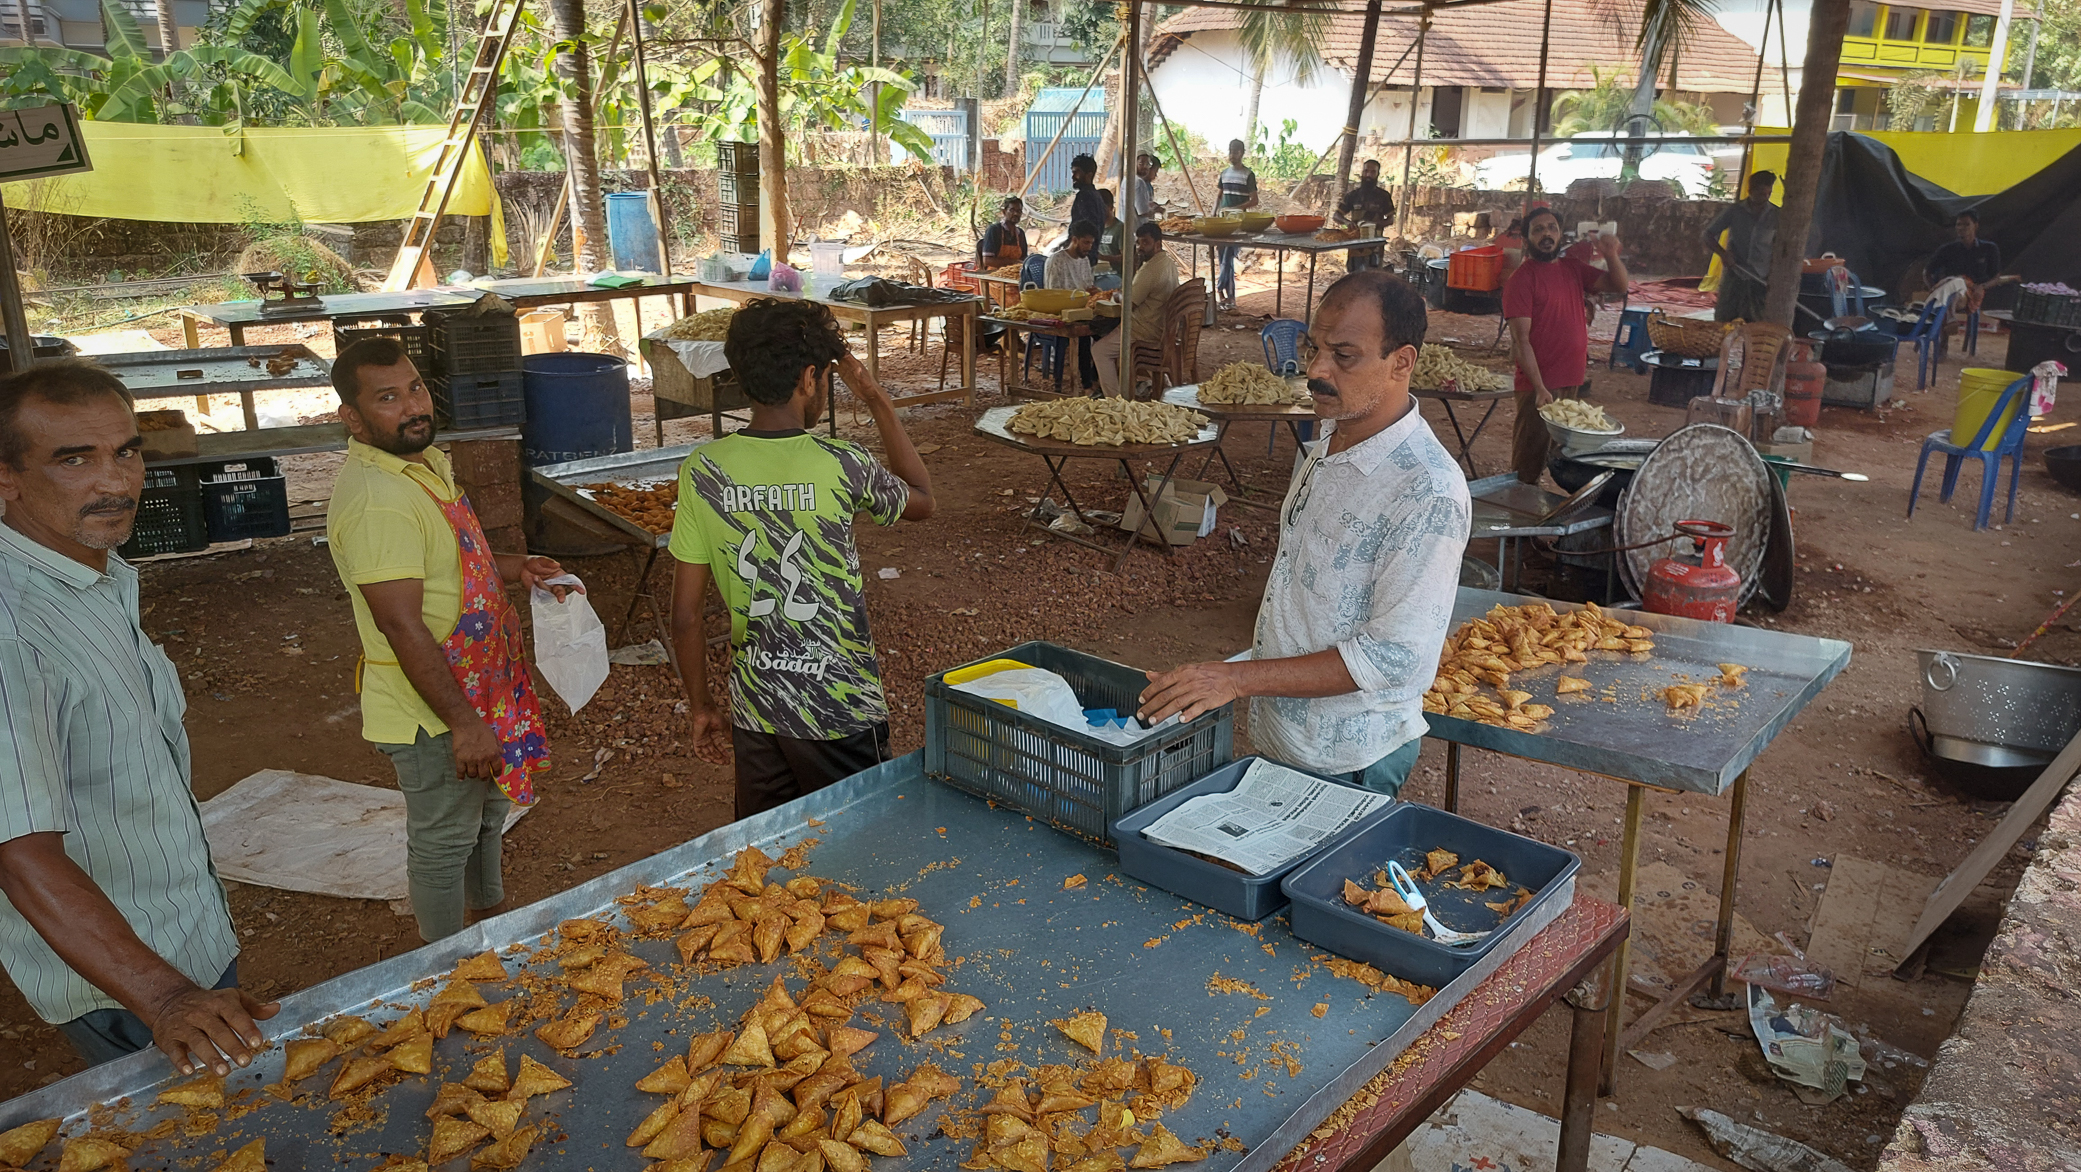 <span  class="uc_style_uc_tiles_grid_image_elementor_uc_items_attribute_title" style="color:#ffffff;">Samosas: this is how they are produced</span>